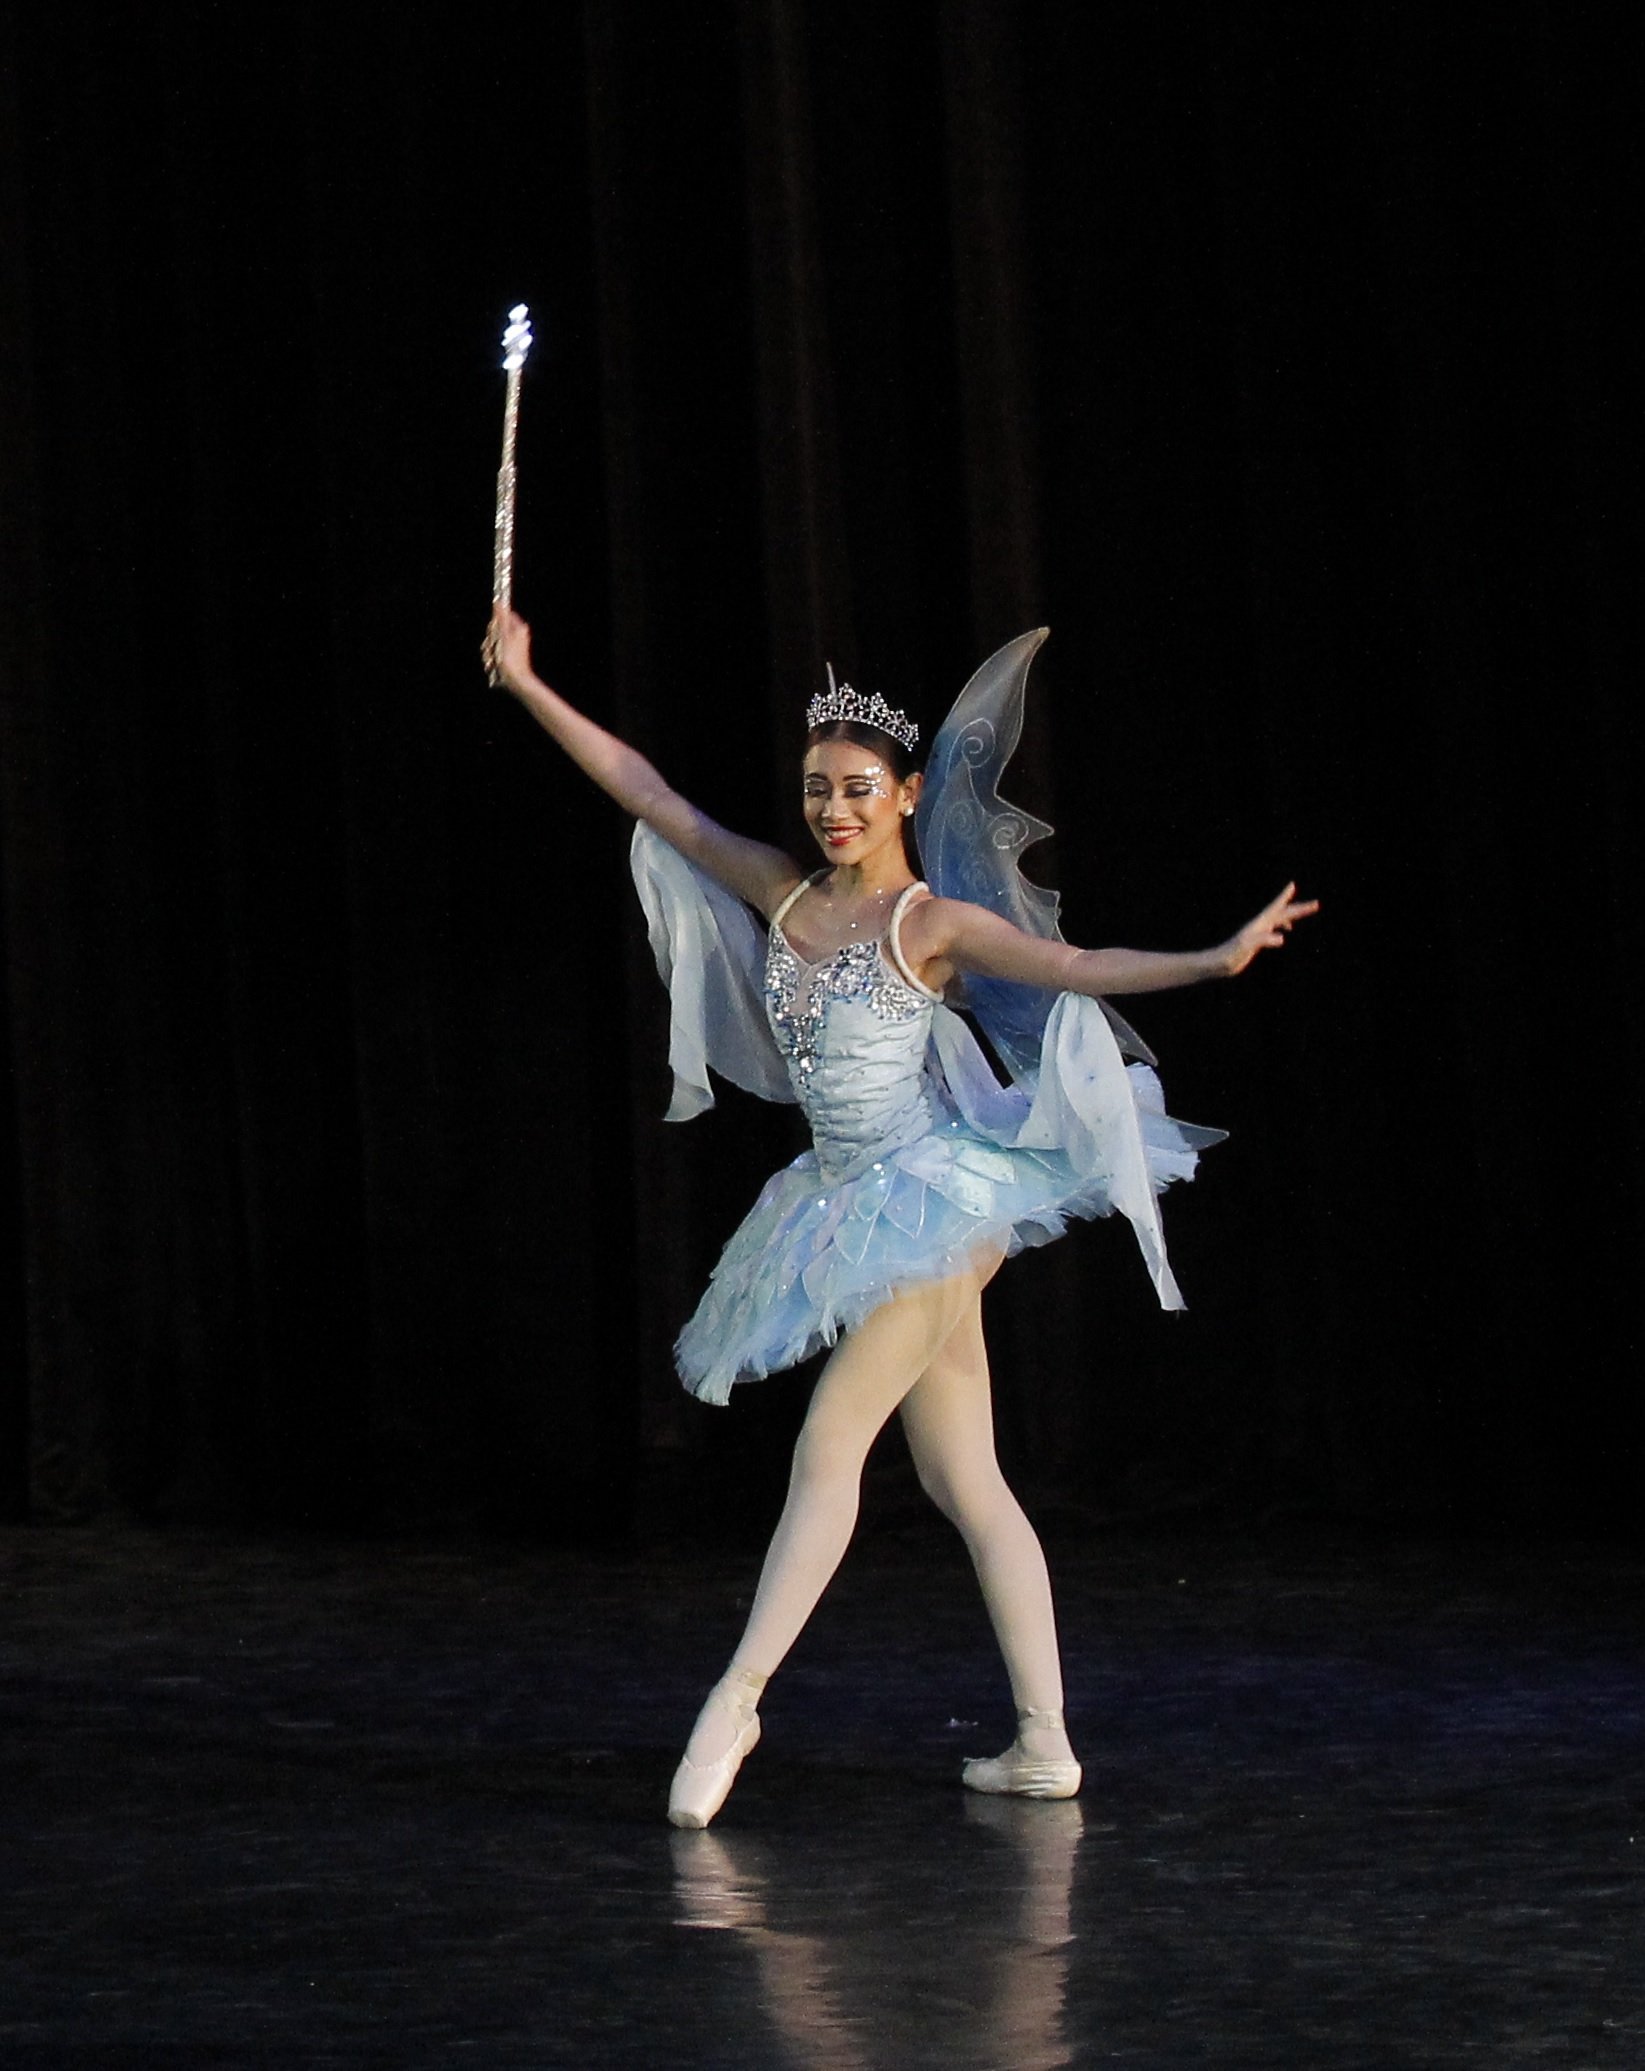    With the wave of her magic wand, the Blue Fairy (Abigail Oliveiro) pirouettes in her powder blue tutu and makes wishes come true in Osias Barroso Jr.’s  Pinocchio  (2015). Photo by Ocs Alvarez   